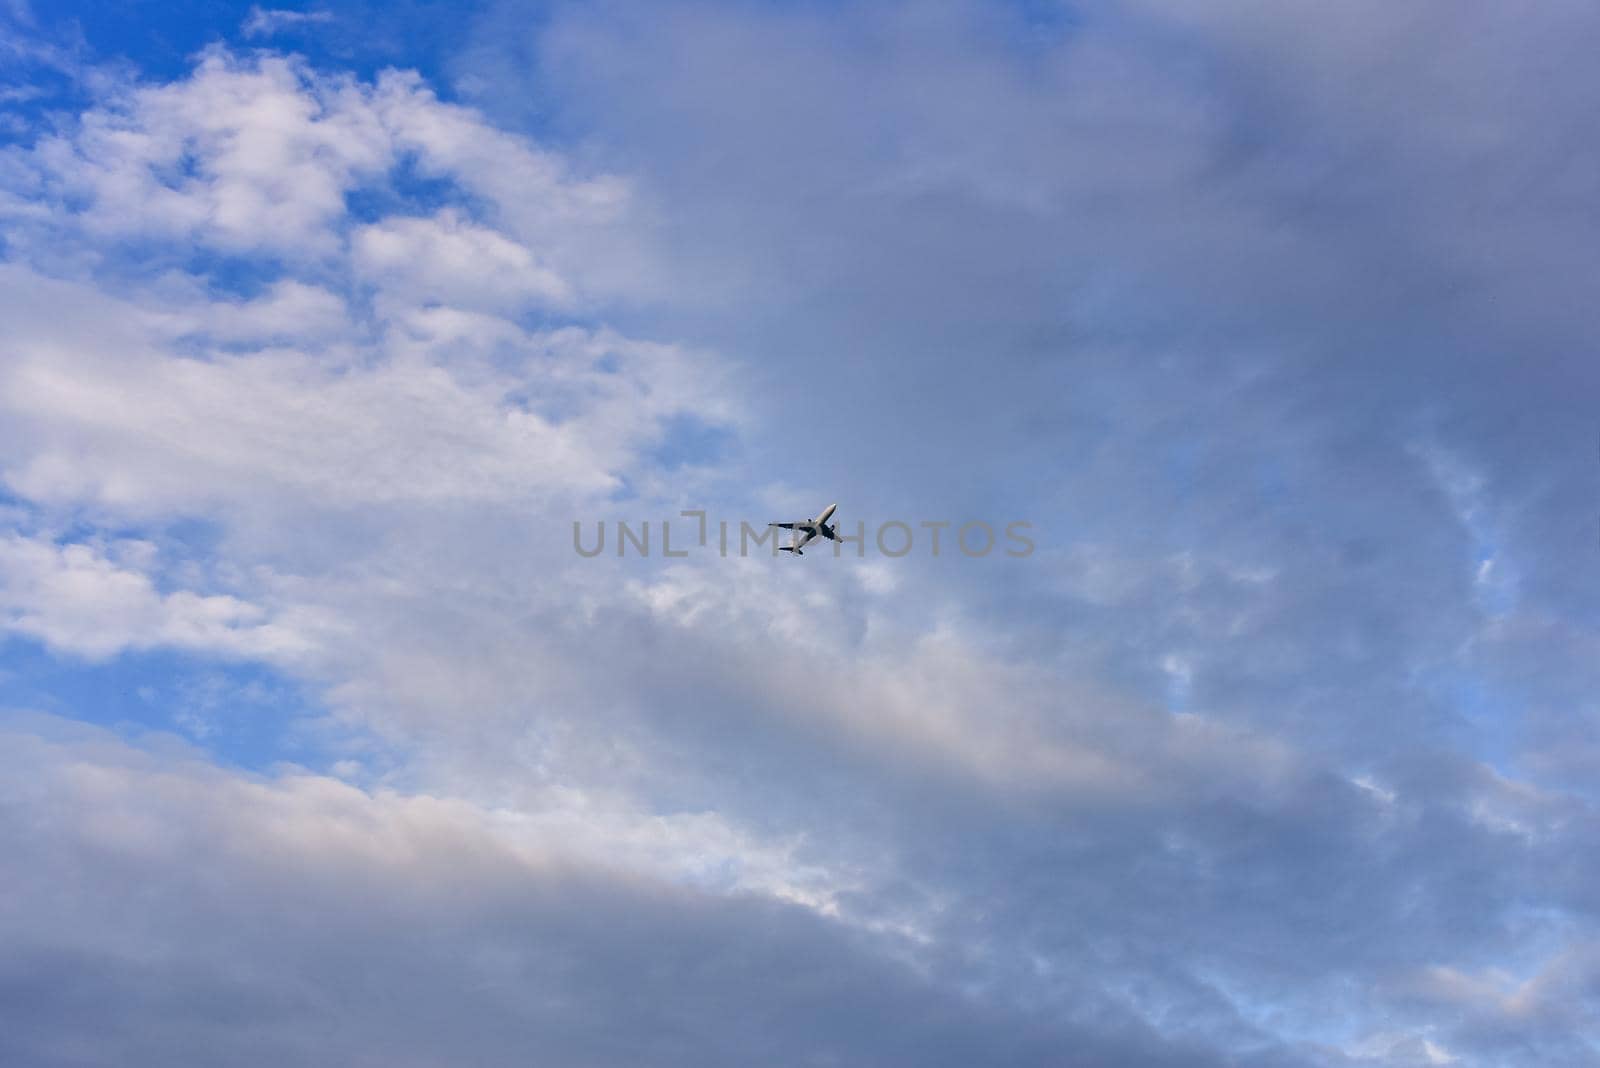 Passenger plane is flying far away against the blue summer and cloudy sky.